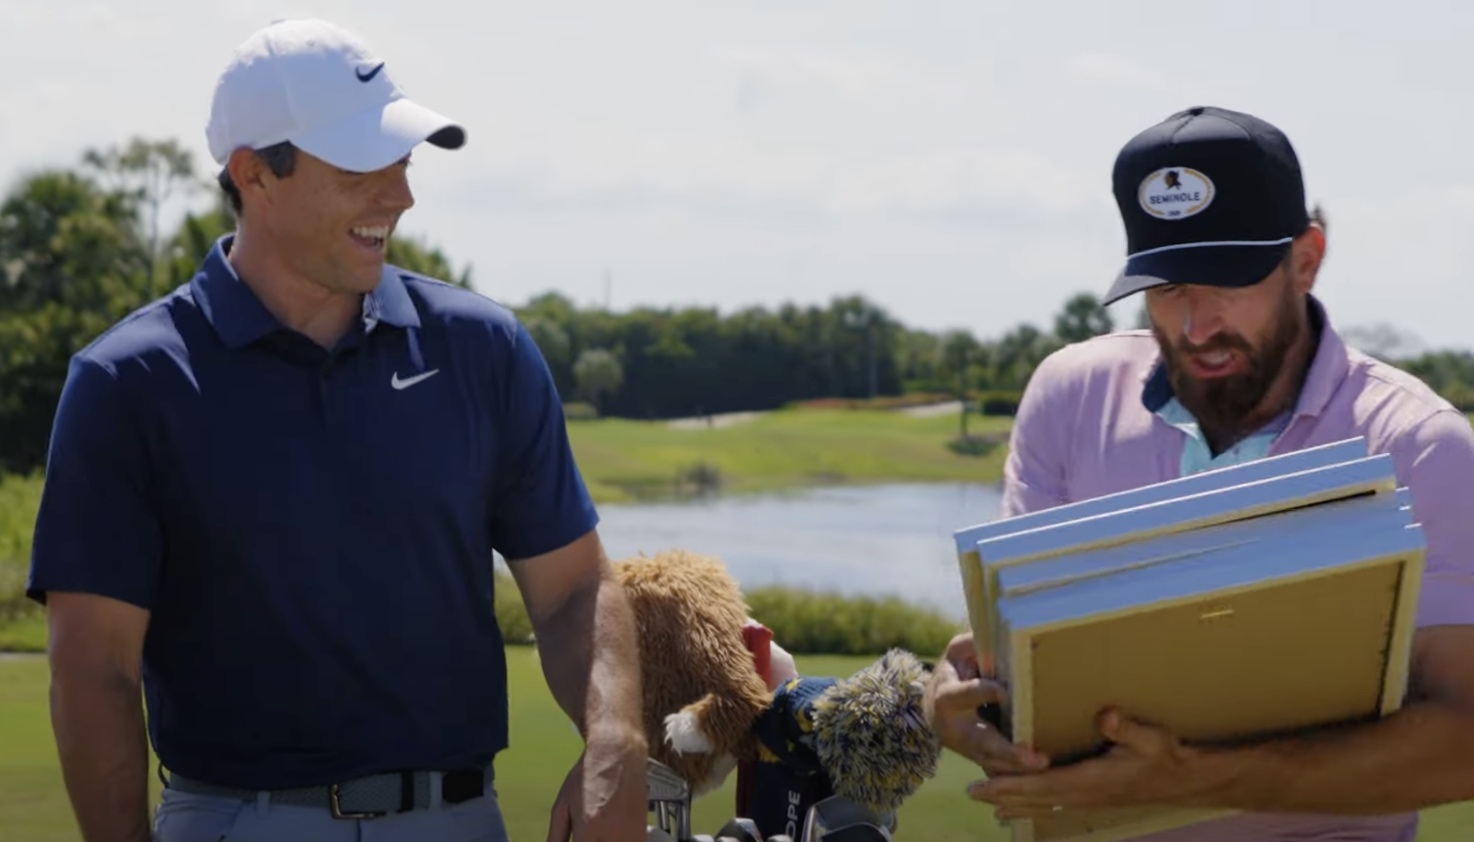 Golf world records with Rory McIlroy